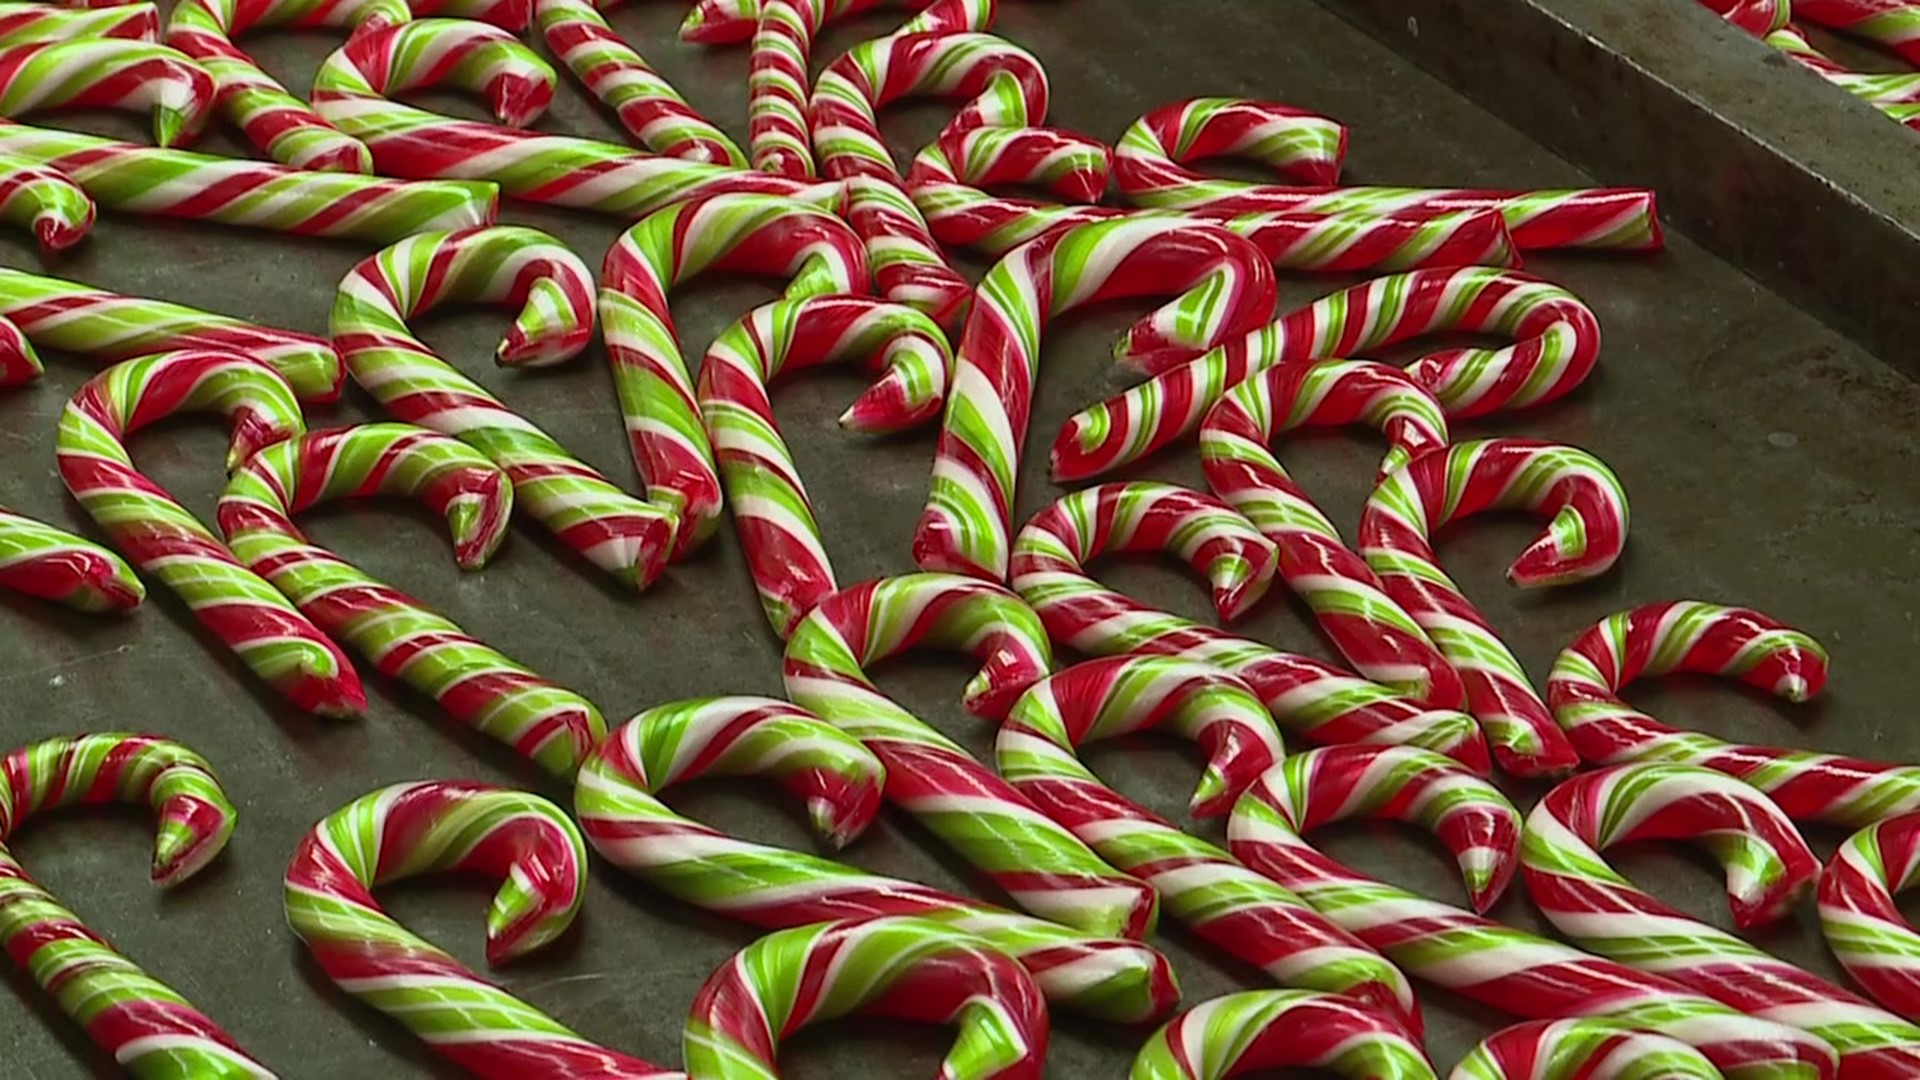 Purity Candy has been making candy canes for more than 100 years. Newswatch 16's Nikki Krize stopped by to see what goes into making the sweet treat.